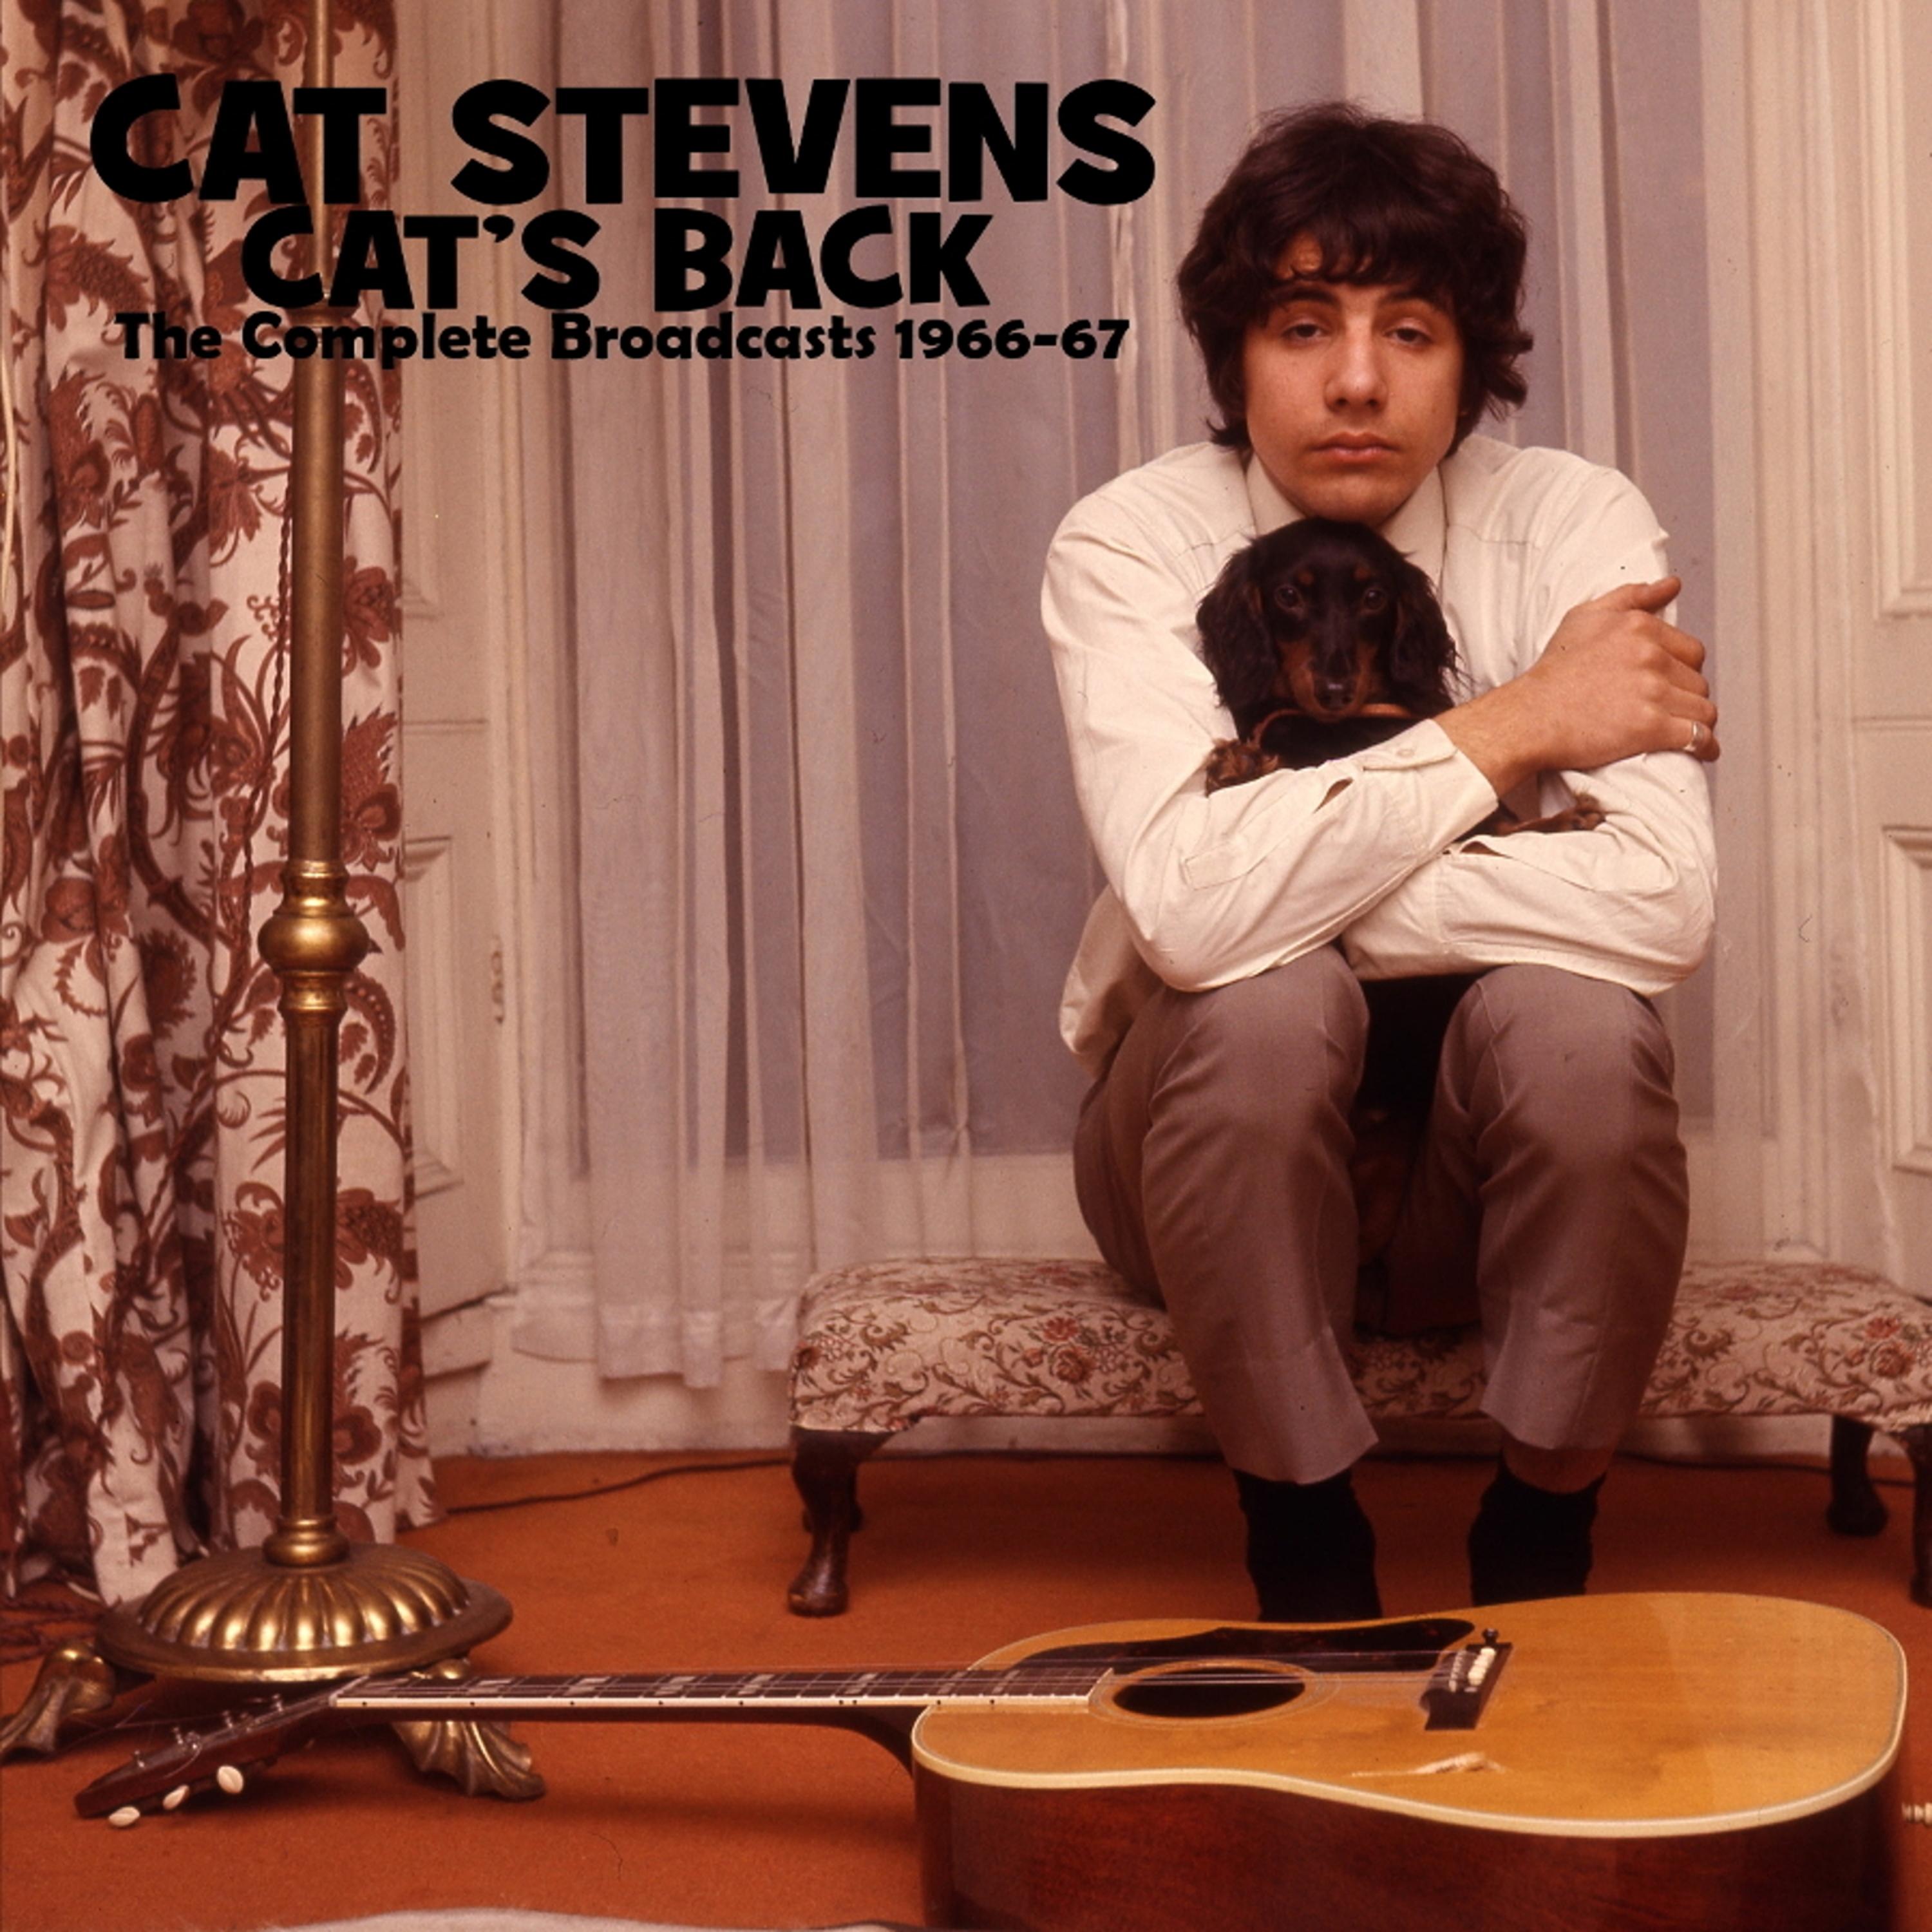 Cat's Back: The Complete Broadcasts 1966 - 67